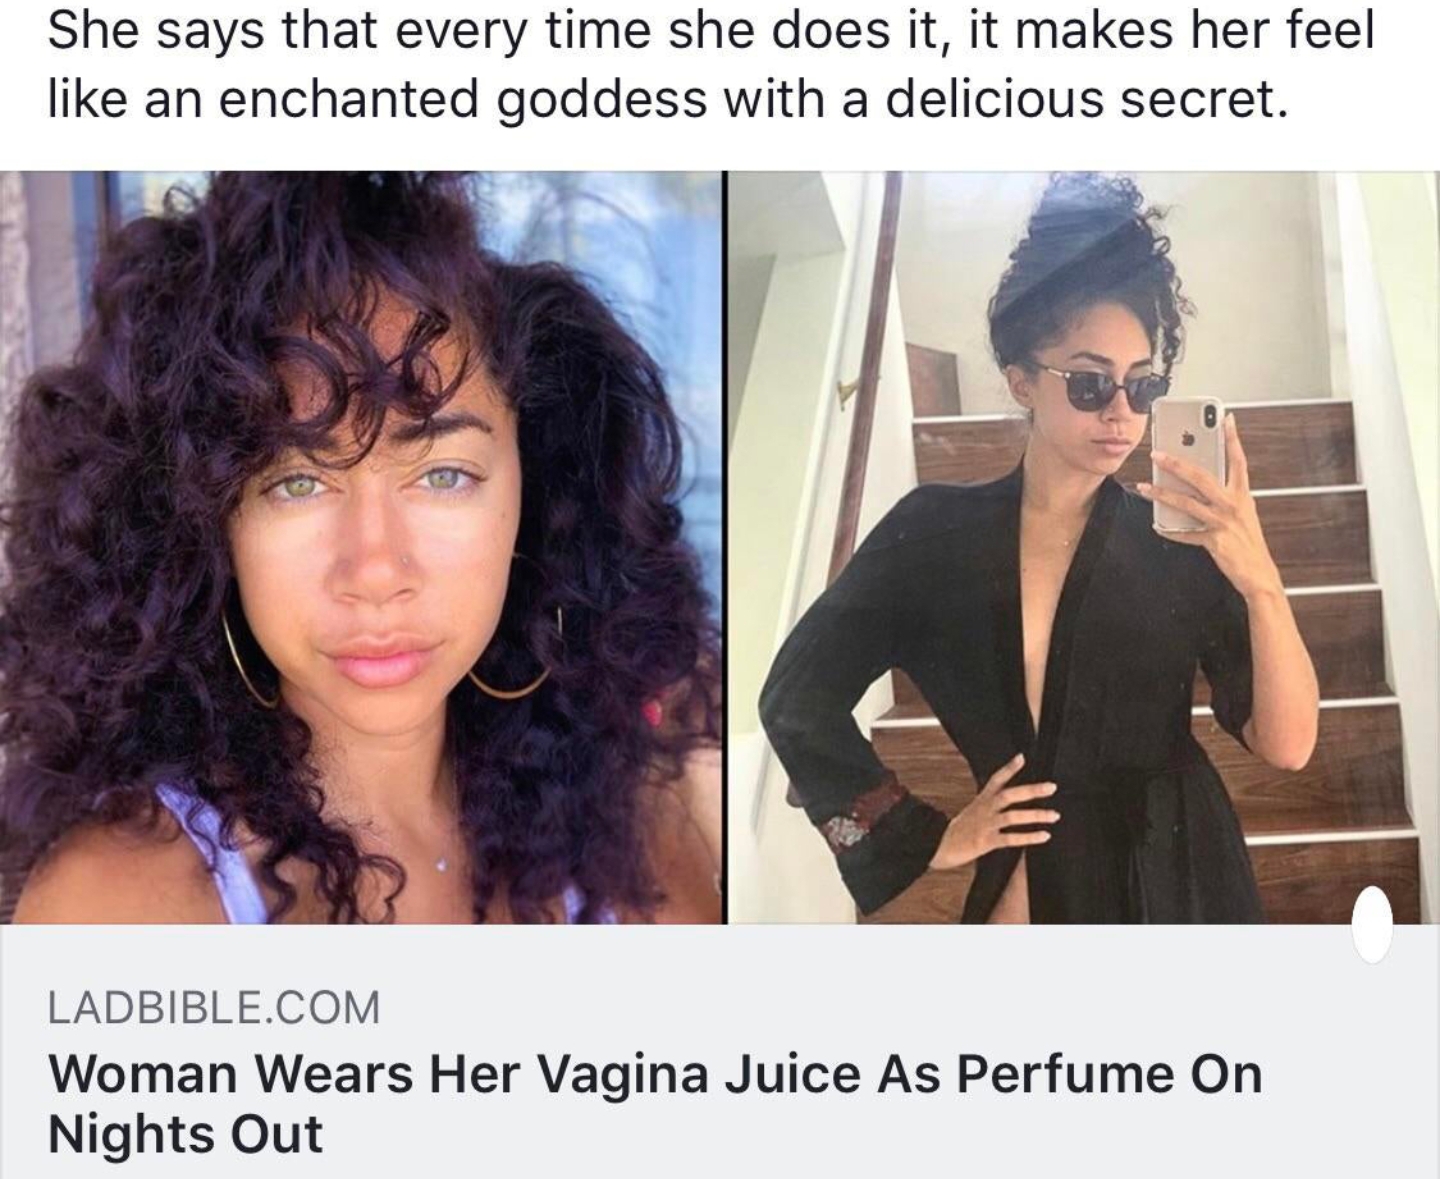 black hair - She says that every time she does it, it makes her feel an enchanted goddess with a delicious secret. Ladbible.Com Woman Wears Her Vagina Juice As Perfume On Nights Out